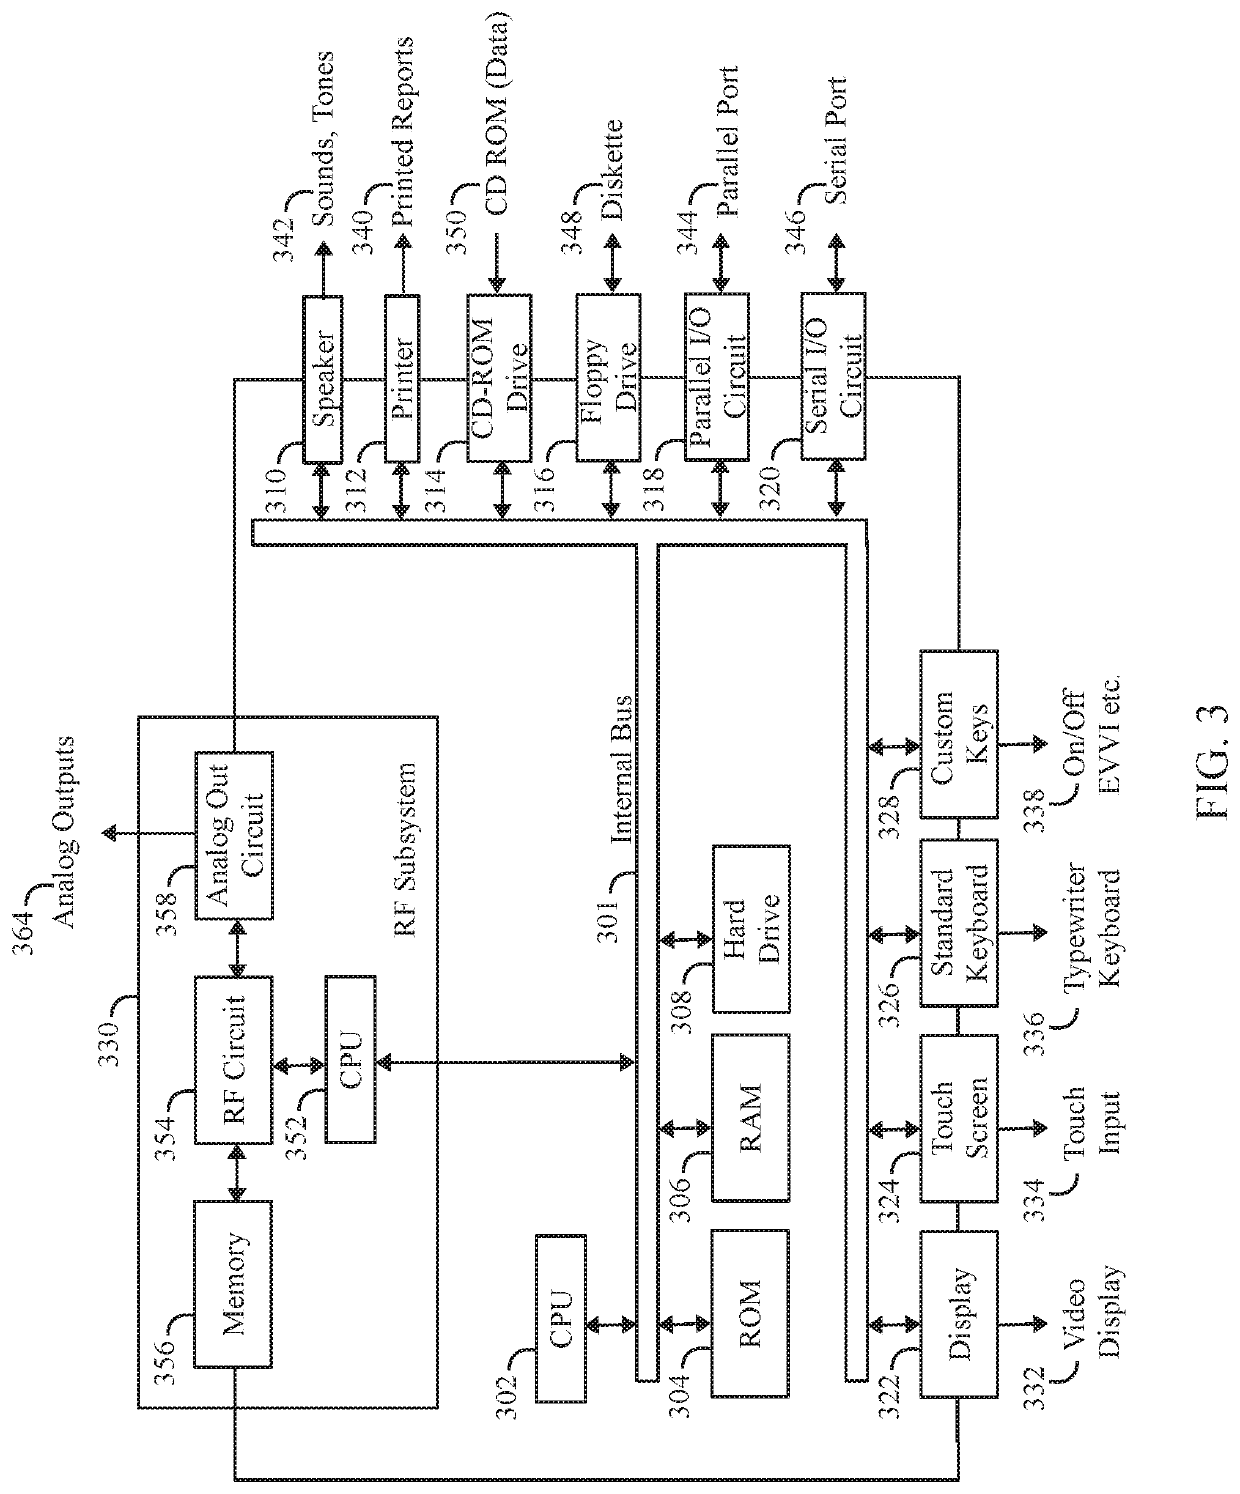 Implantable medical device and method for managing advertising and scanning schedules